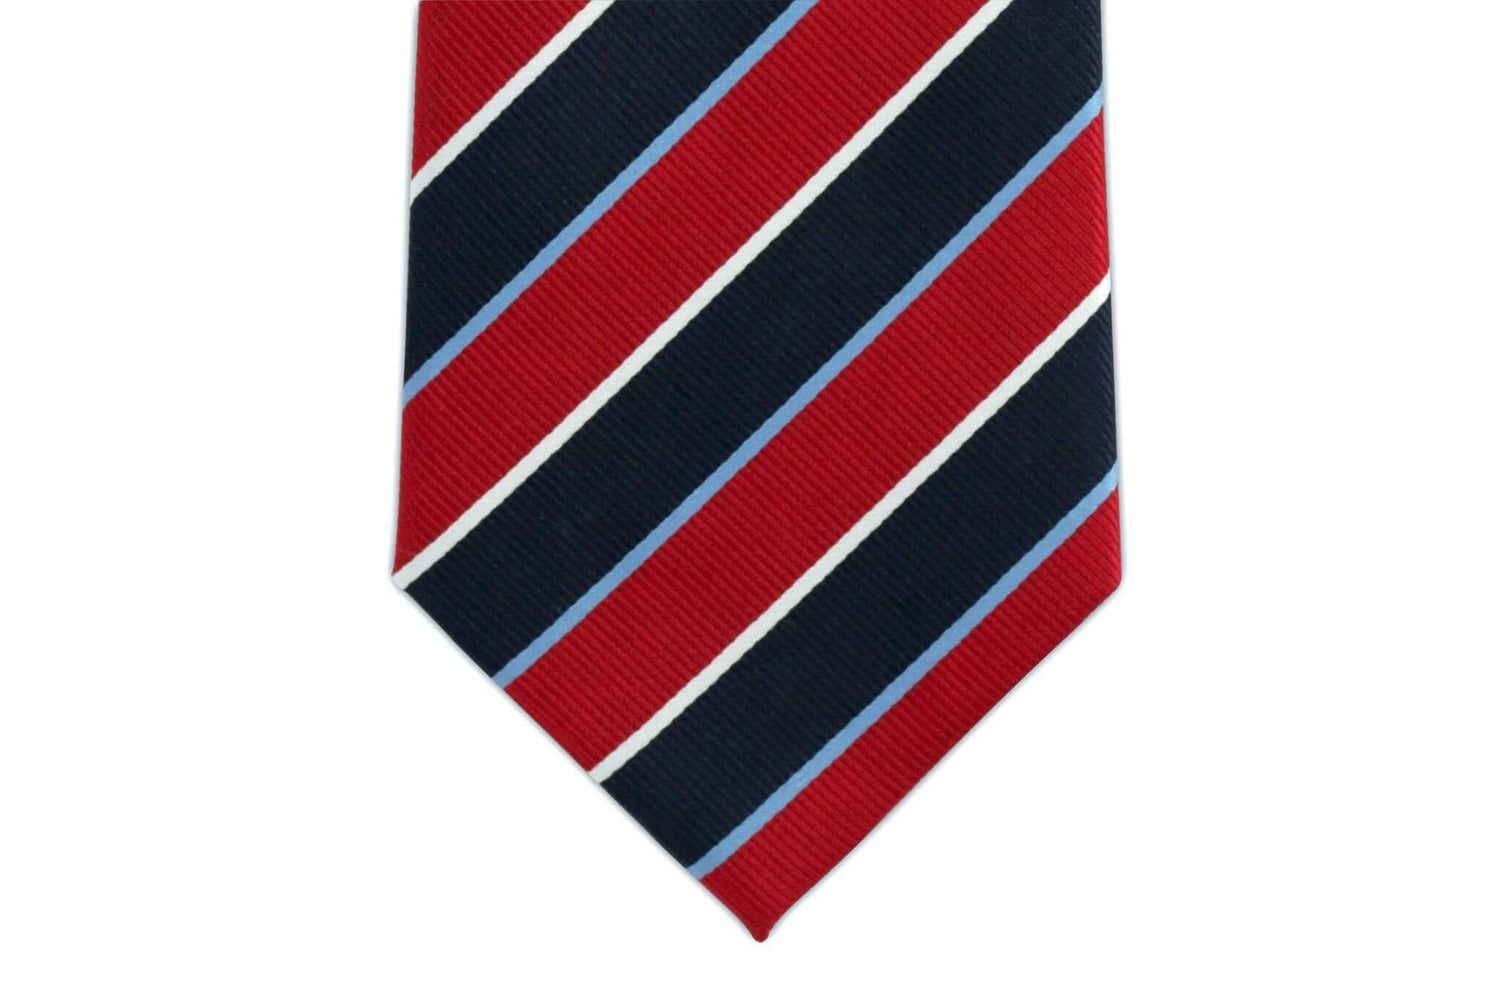 Extra Long Ties - 100% Silk Extra Long Tie With Red And Navy Stripes